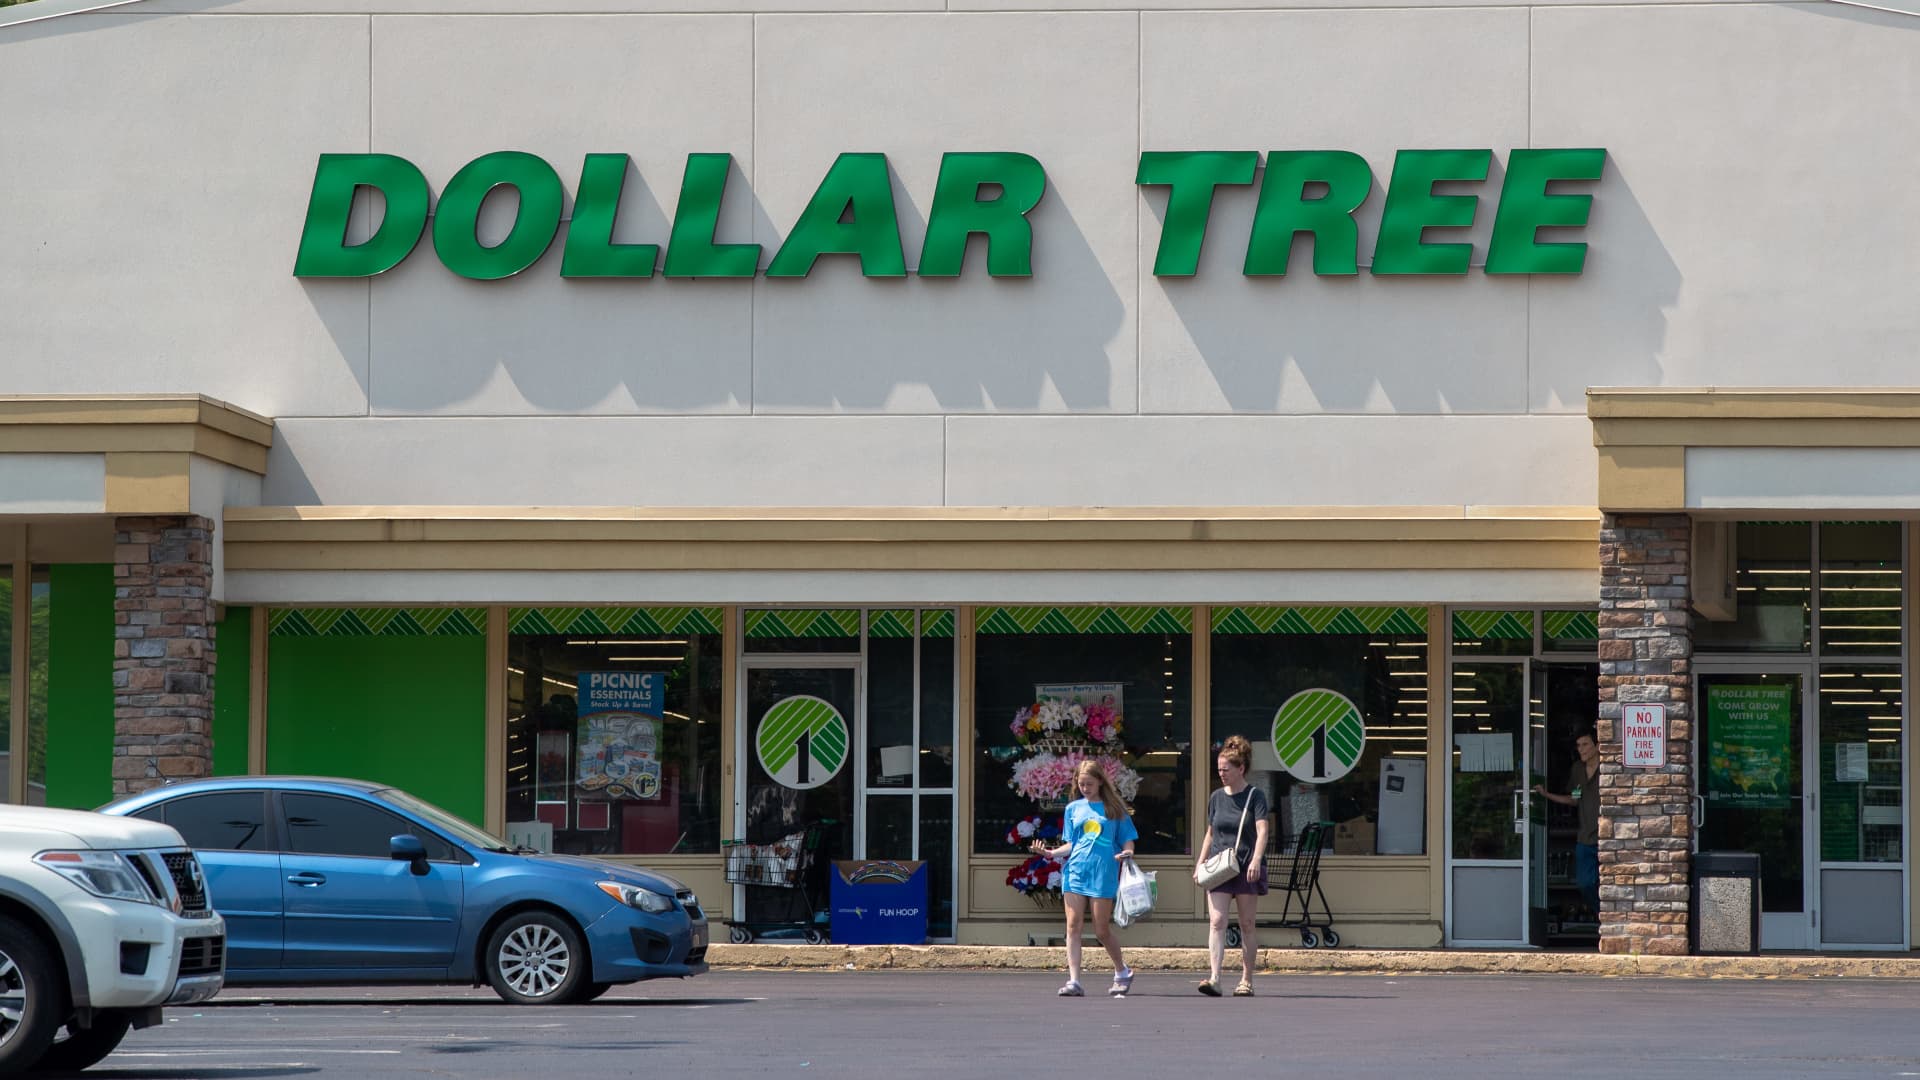 Dollar Tree’s shares sink, as CEO says ‘difficult’ economy is pressuring discounter